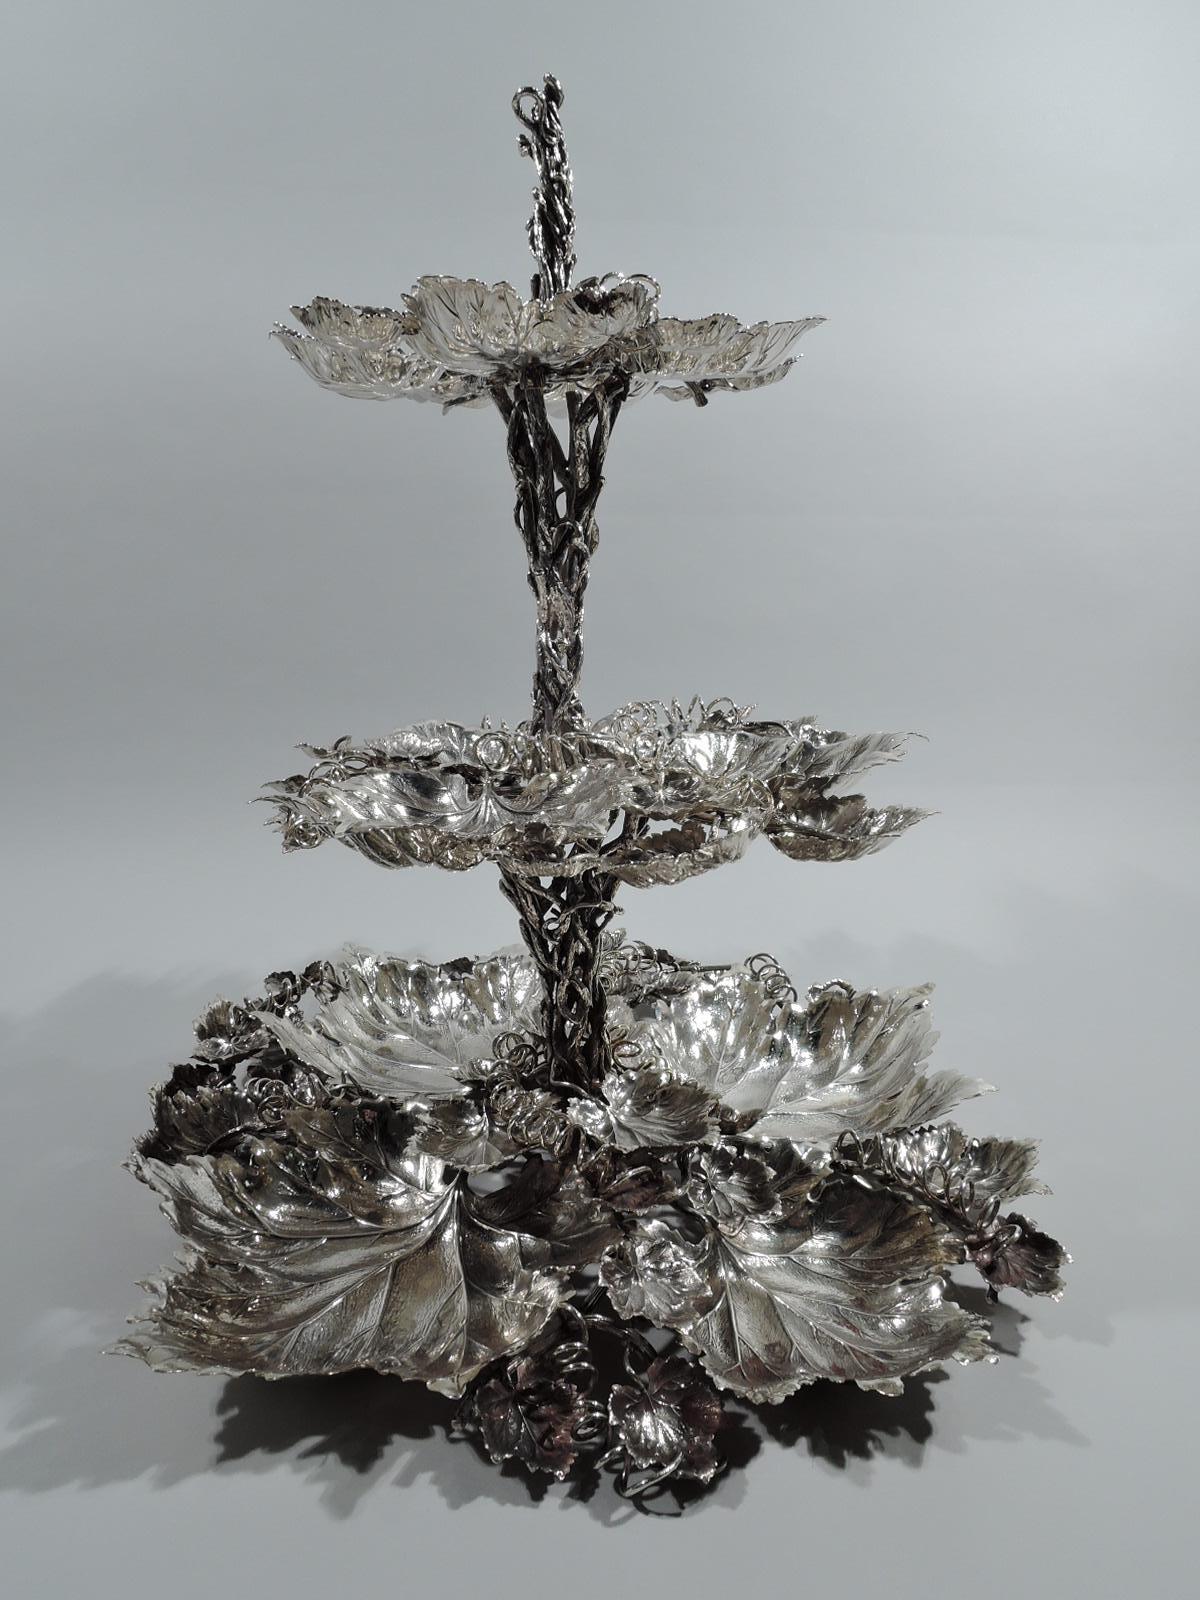 Wonderful sterling silver serving Stand. Open and entwined branch shaft supporting 3 graduated tiers, comprising irregularly arranged leaves of various sizes and curlicue tendrils. A greenery-silvery centerpiece that's perfect for serving